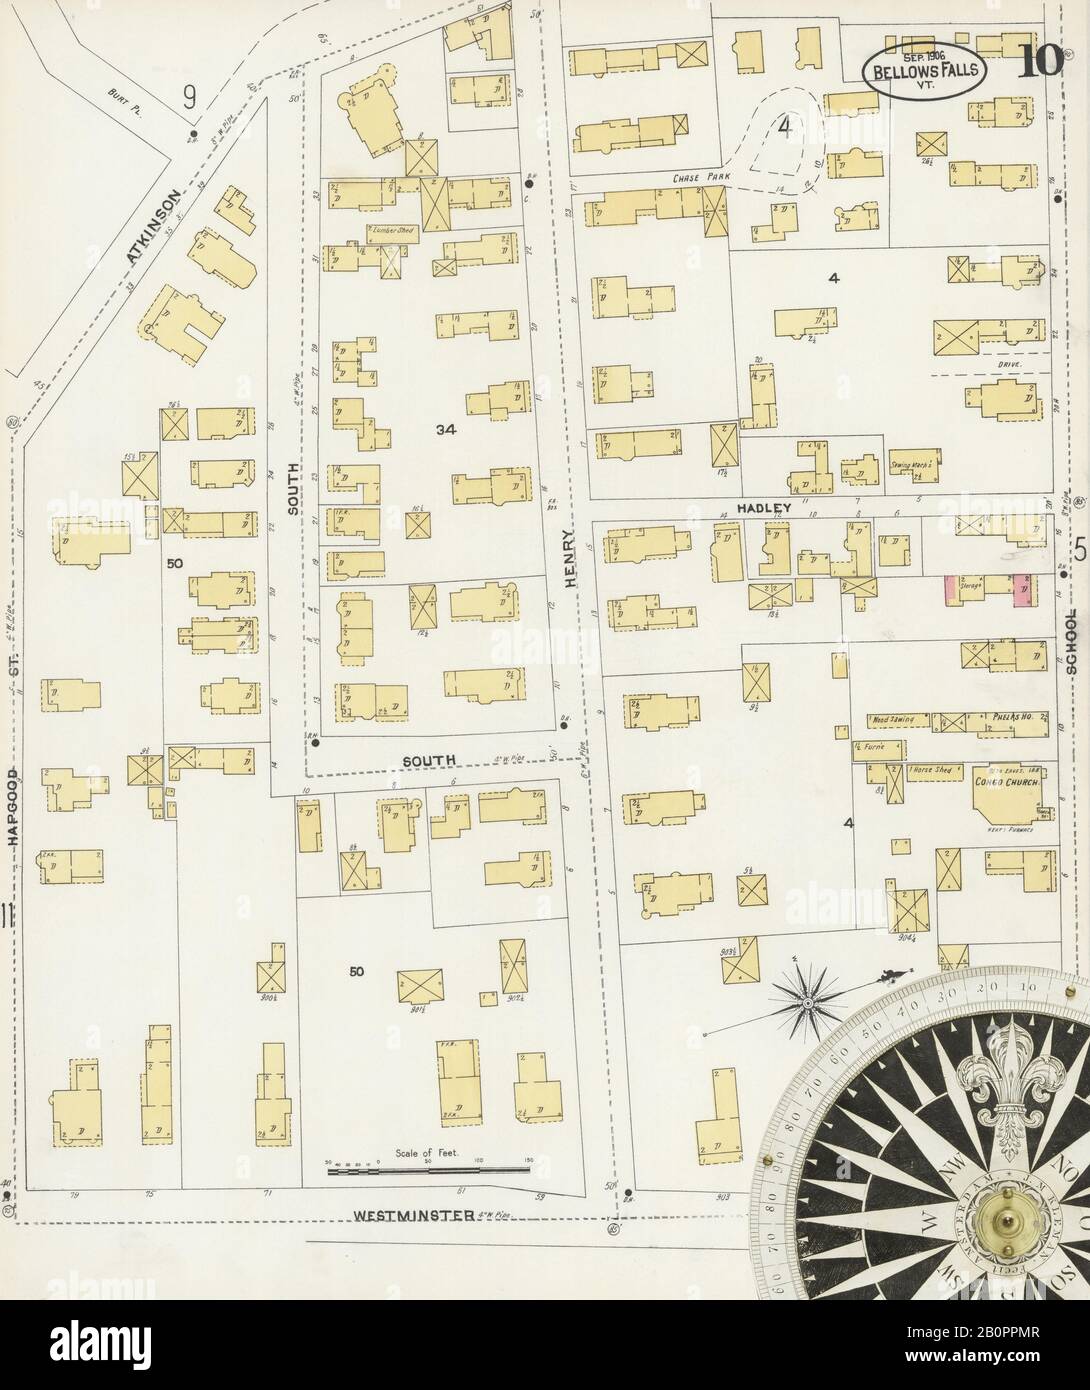 Image 10 of Sanborn Fire Insurance Map from Bellows Falls, Windham County, Vermont. Sep 1906. 13 Sheet(s), America, street map with a Nineteenth Century compass Stock Photo